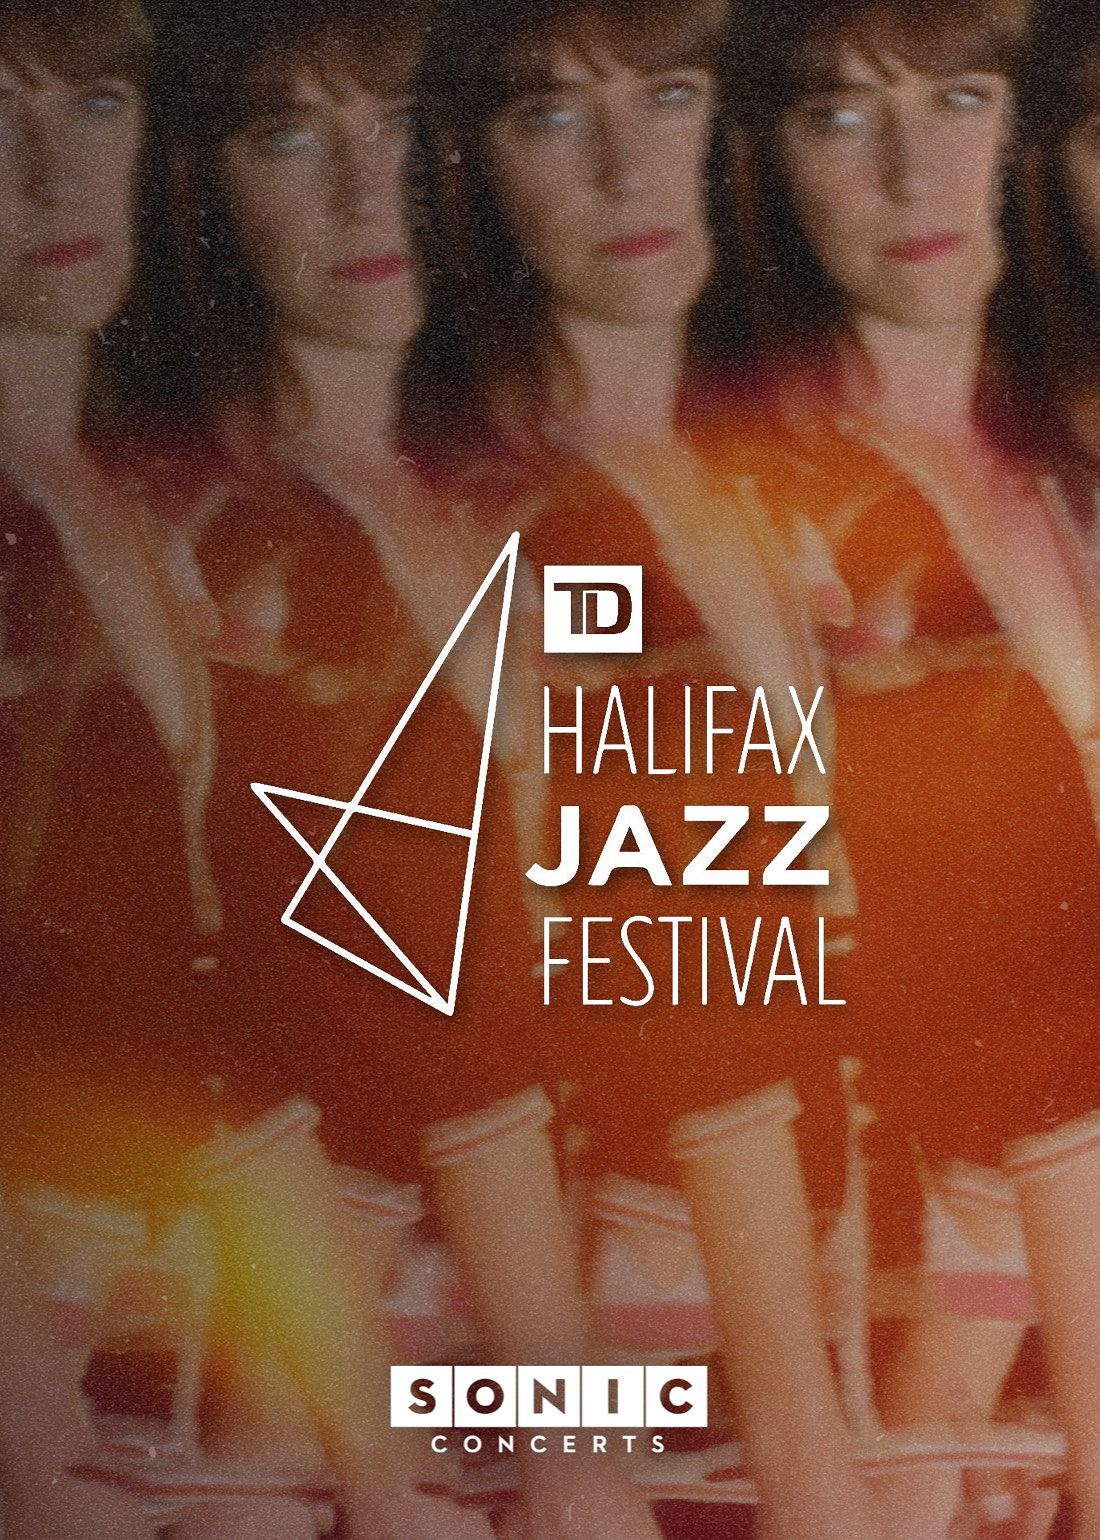 2023 TD Halifax Jazz Festival: Presented by Sonic Concerts - Feist Tickets  at TD Main Stage - Salter Lot in Halifax by Halifax Jazz Fest | Tixr